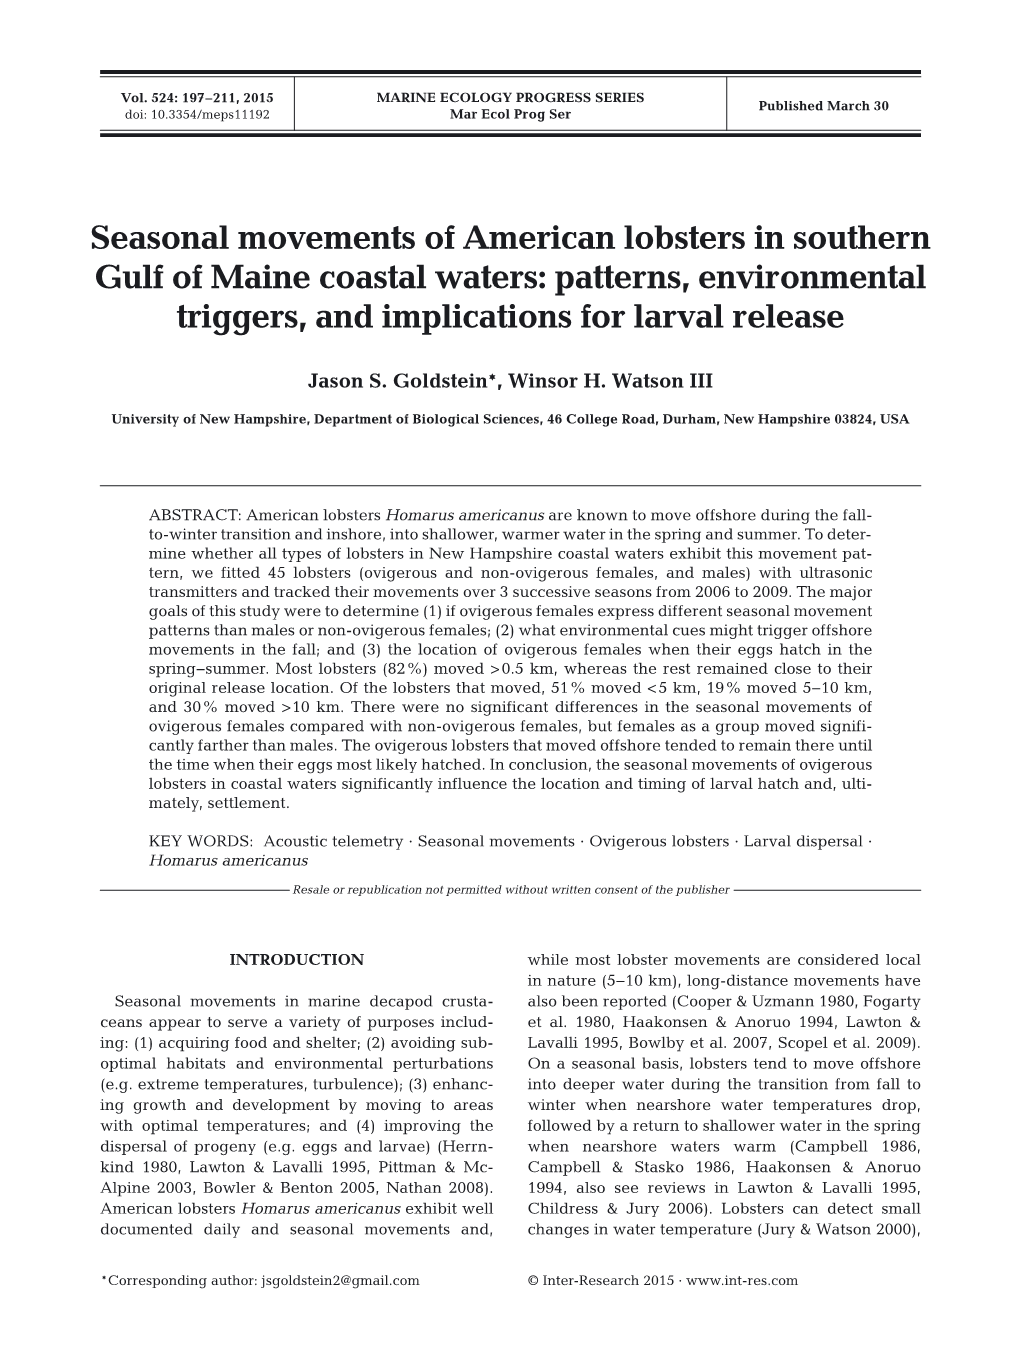 Seasonal Movements of American Lobsters in Southern Gulf of Maine Coastal Waters: Patterns, Environmental Triggers, and Implications for Larval Release